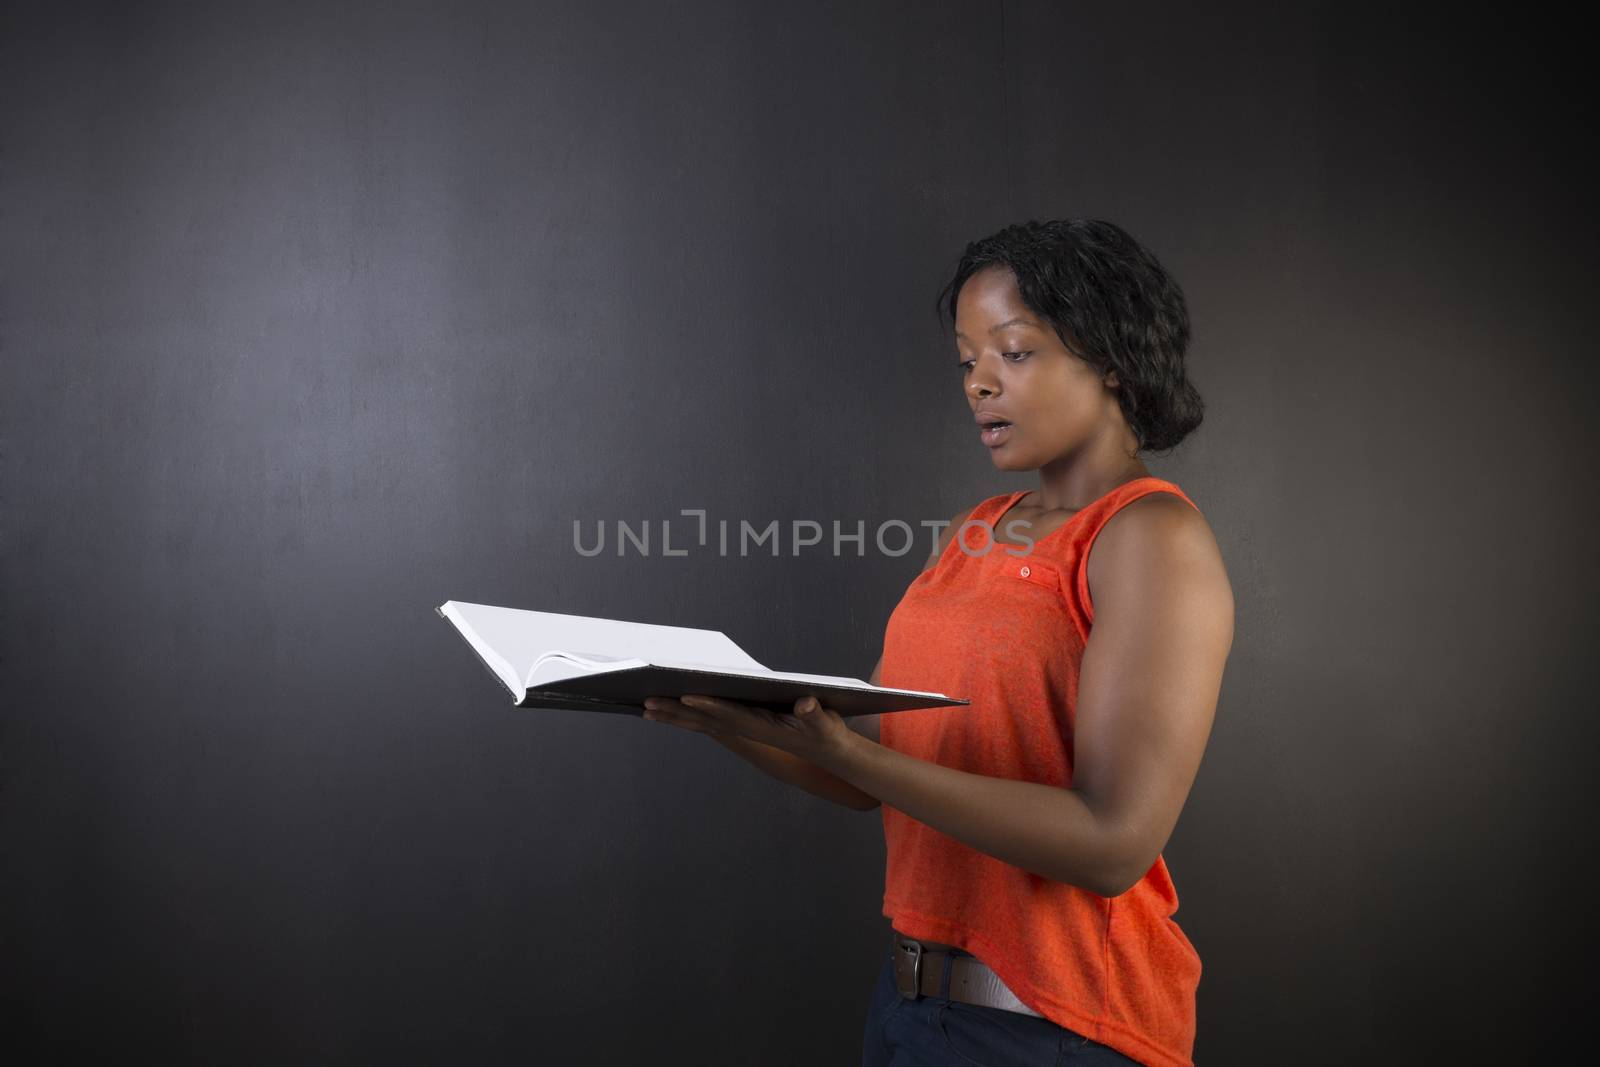 South African or African American woman teacher or student with diary notepad against a blackboard background